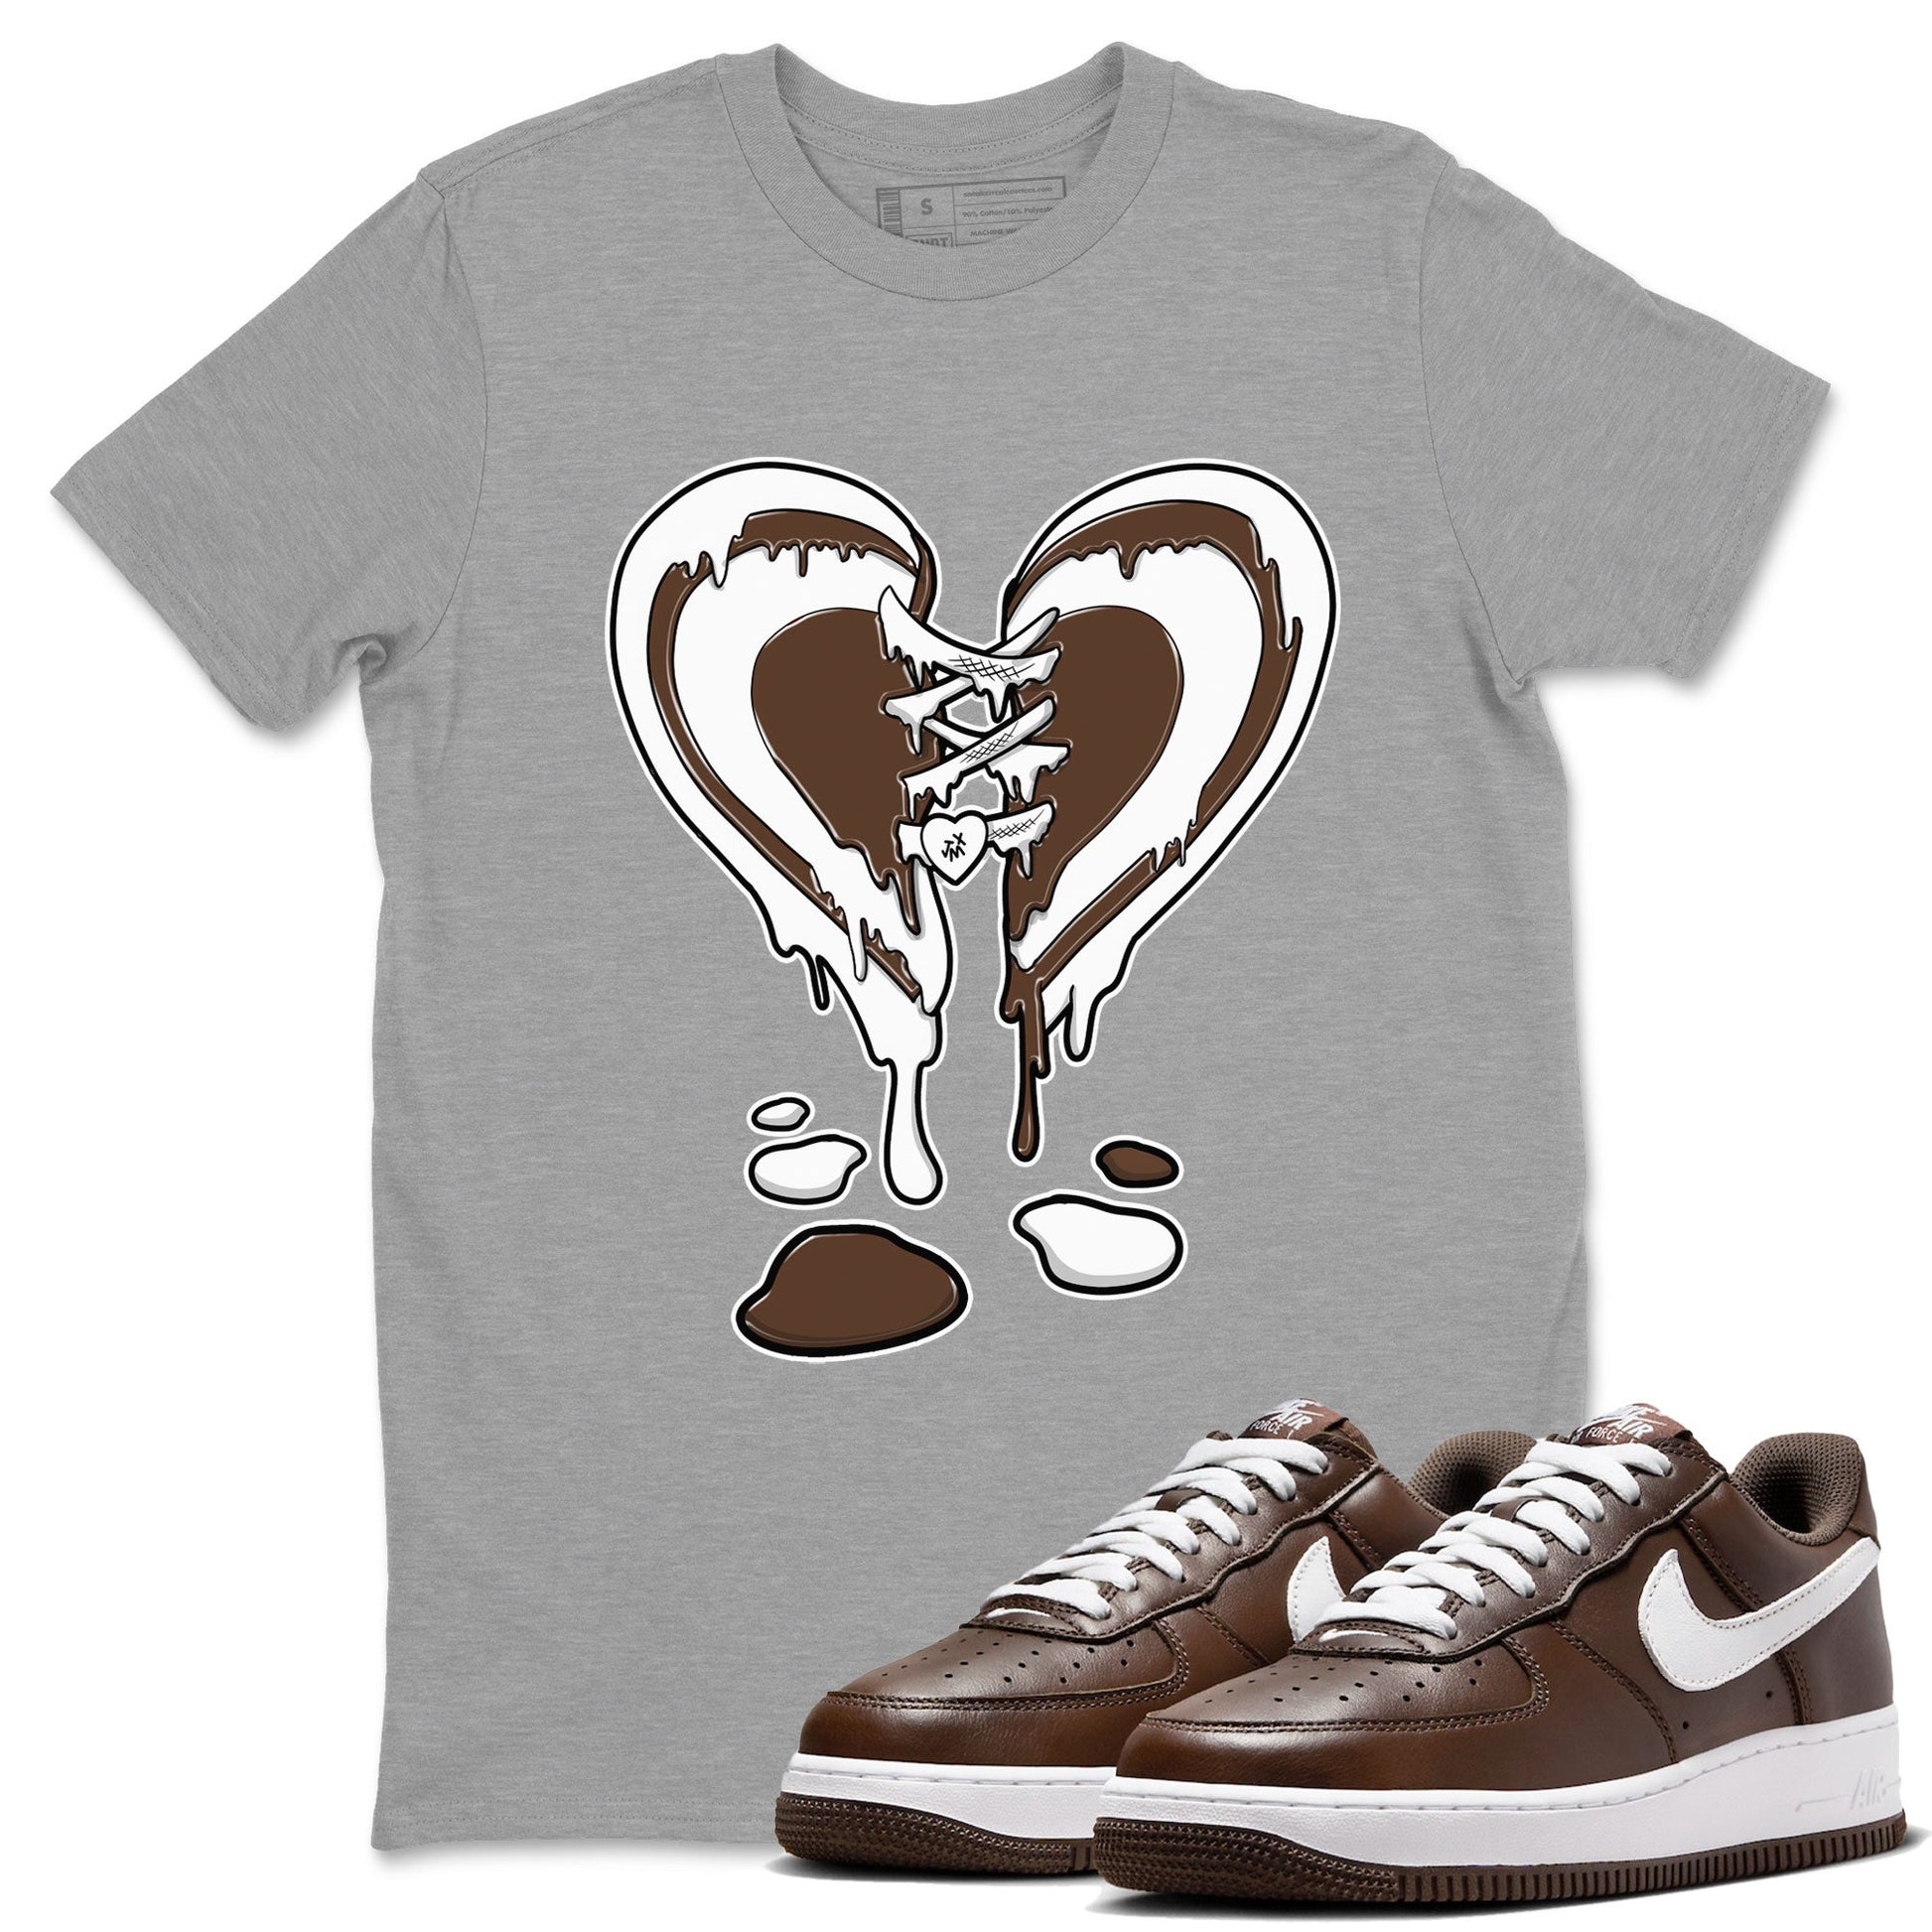 AF1 Chocolate shirt to match jordans Melting Heart sneaker tees Air Force 1 Chocolate SNRT Sneaker Release Tees Cotton Sneaker Tee Heather Grey 1 T-Shirt